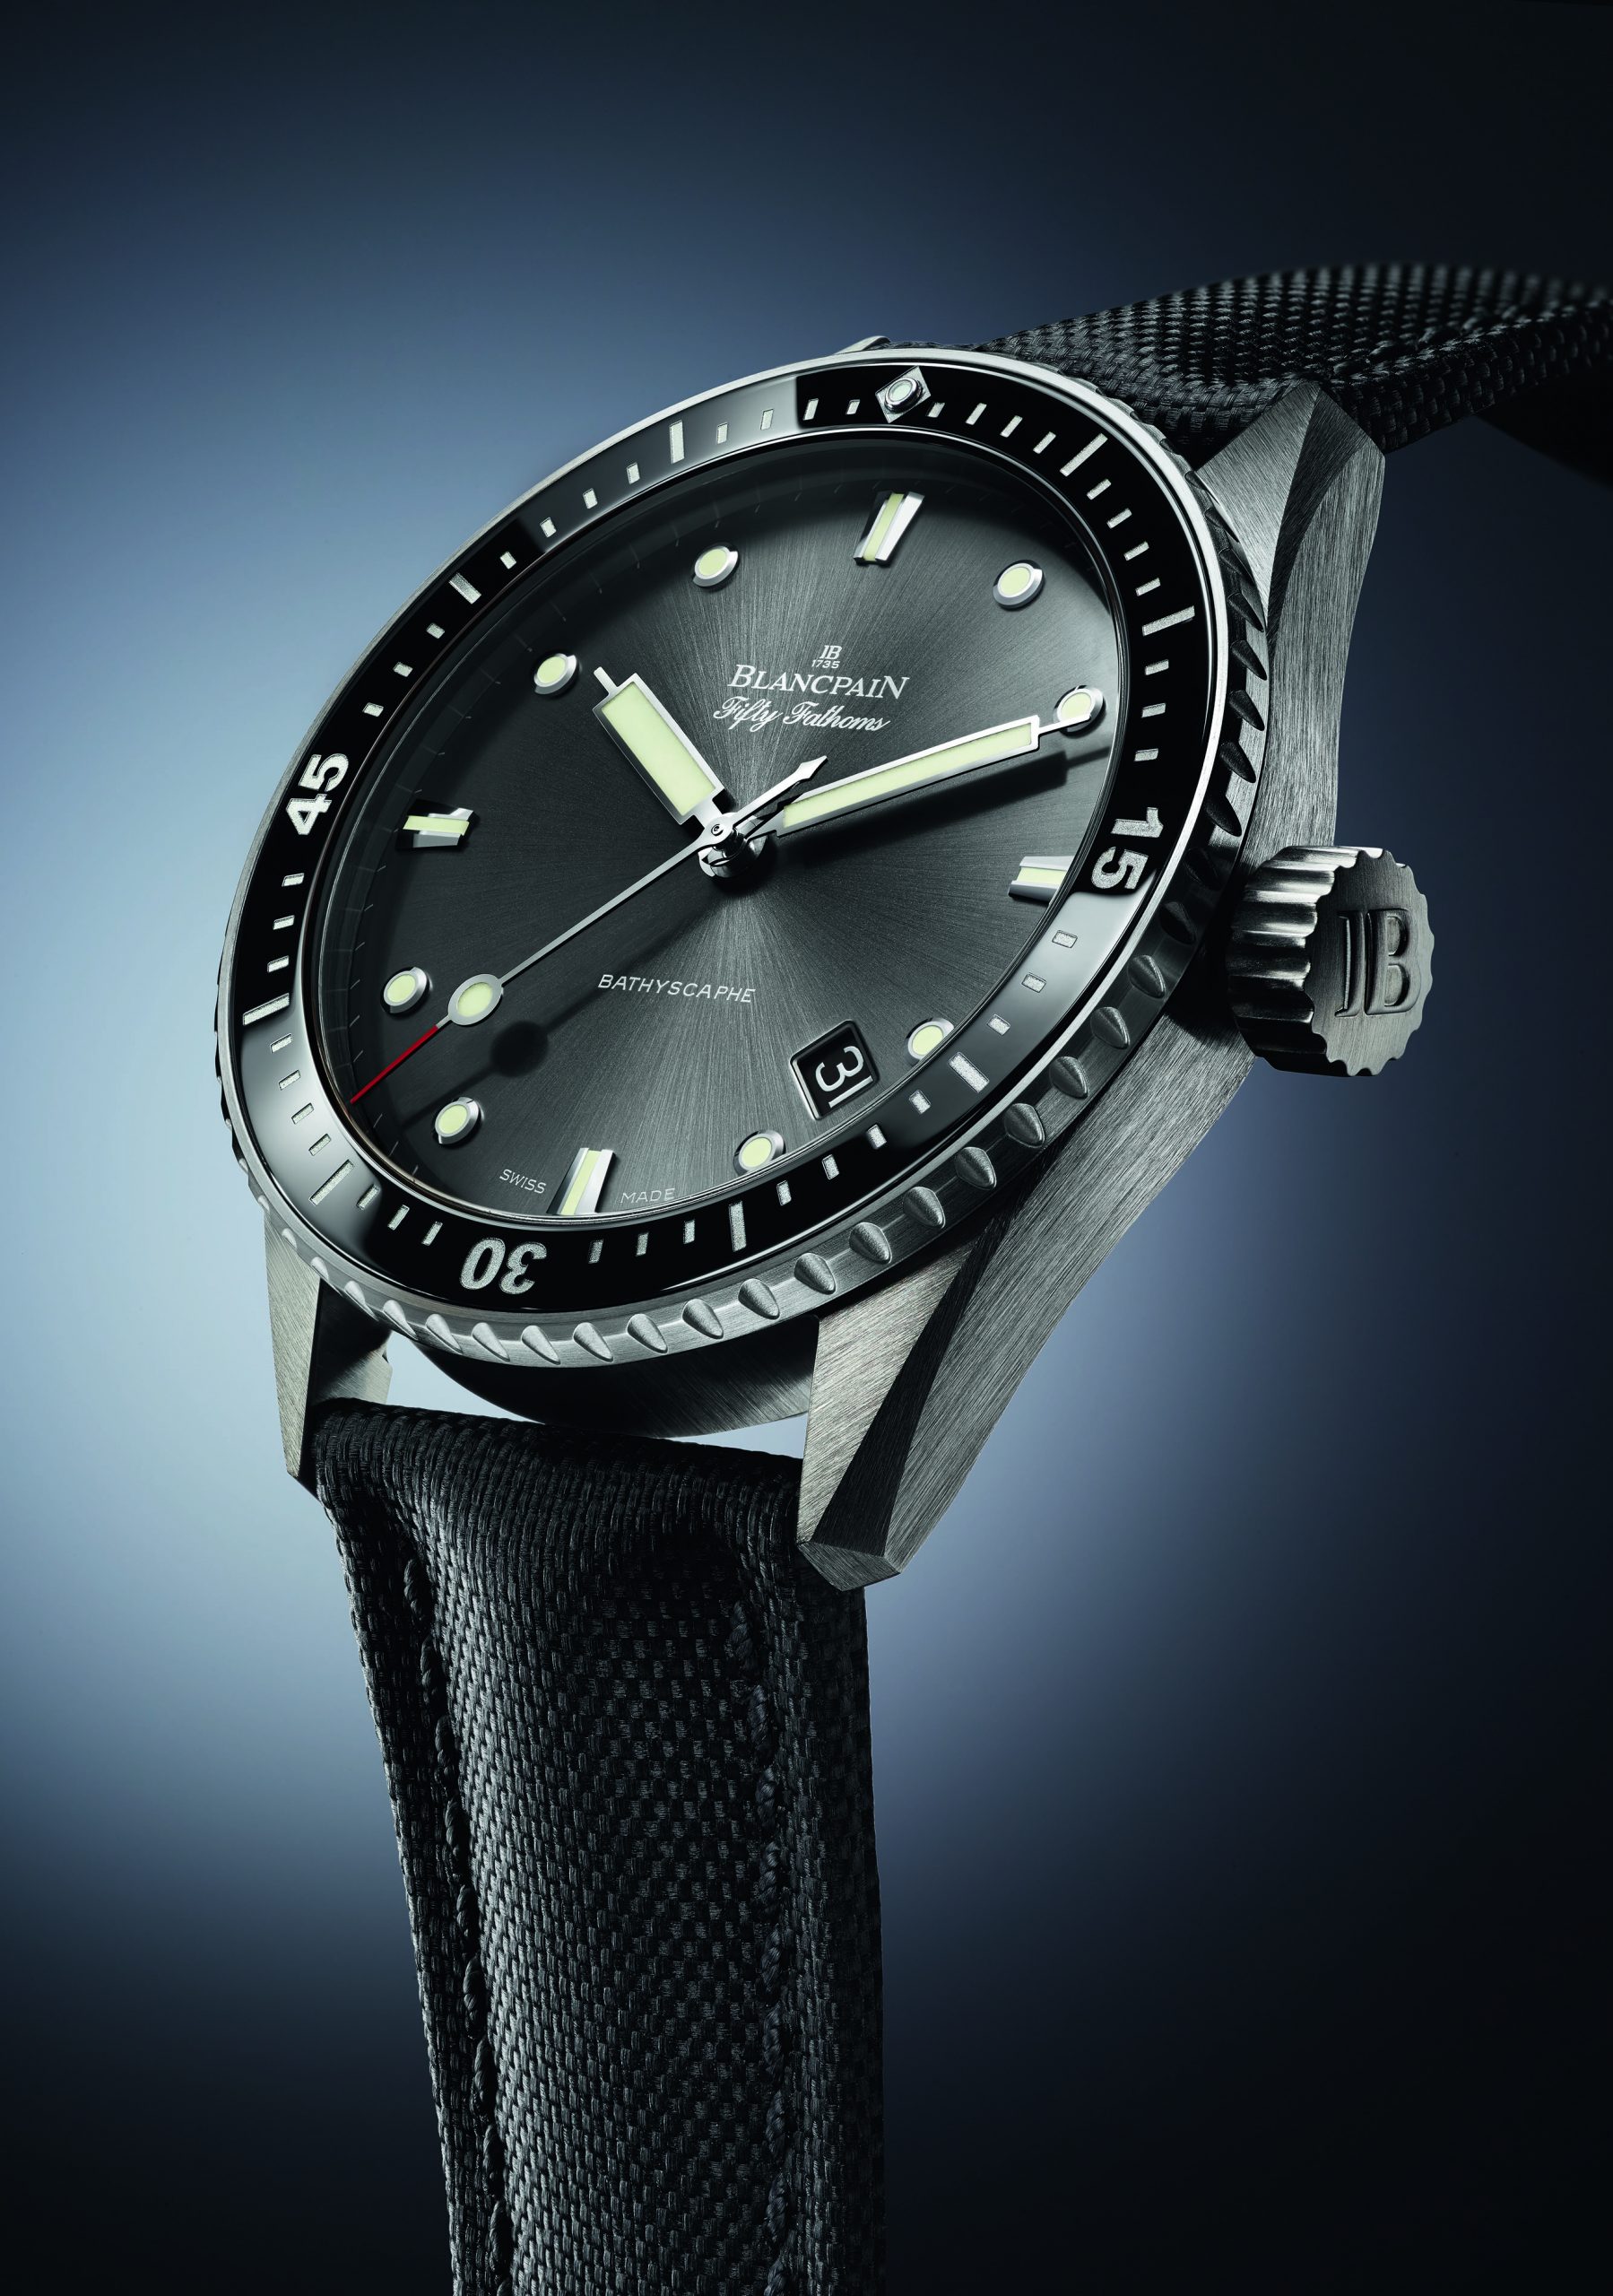 Best Diver Watches of 2013